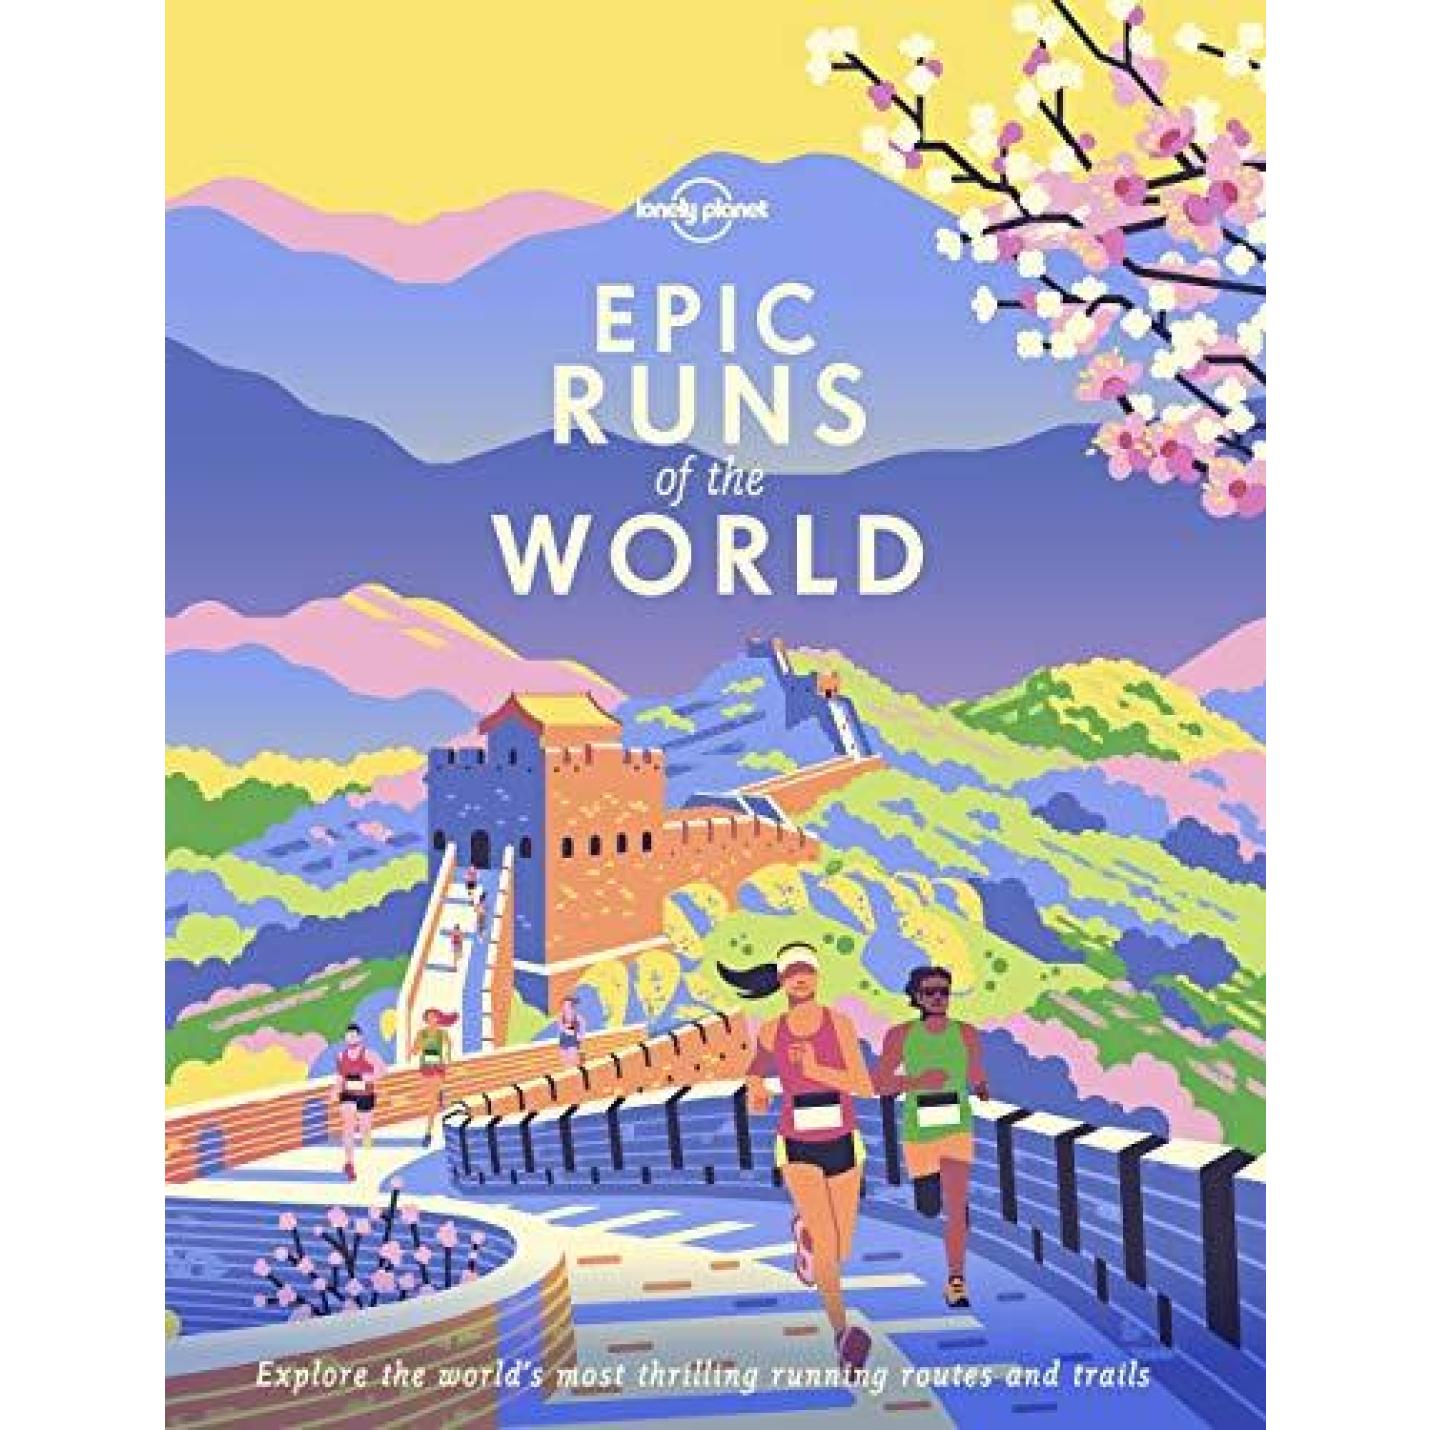 Epic runs of the world: explore the world's most thrilling running routes and trails Hardcover